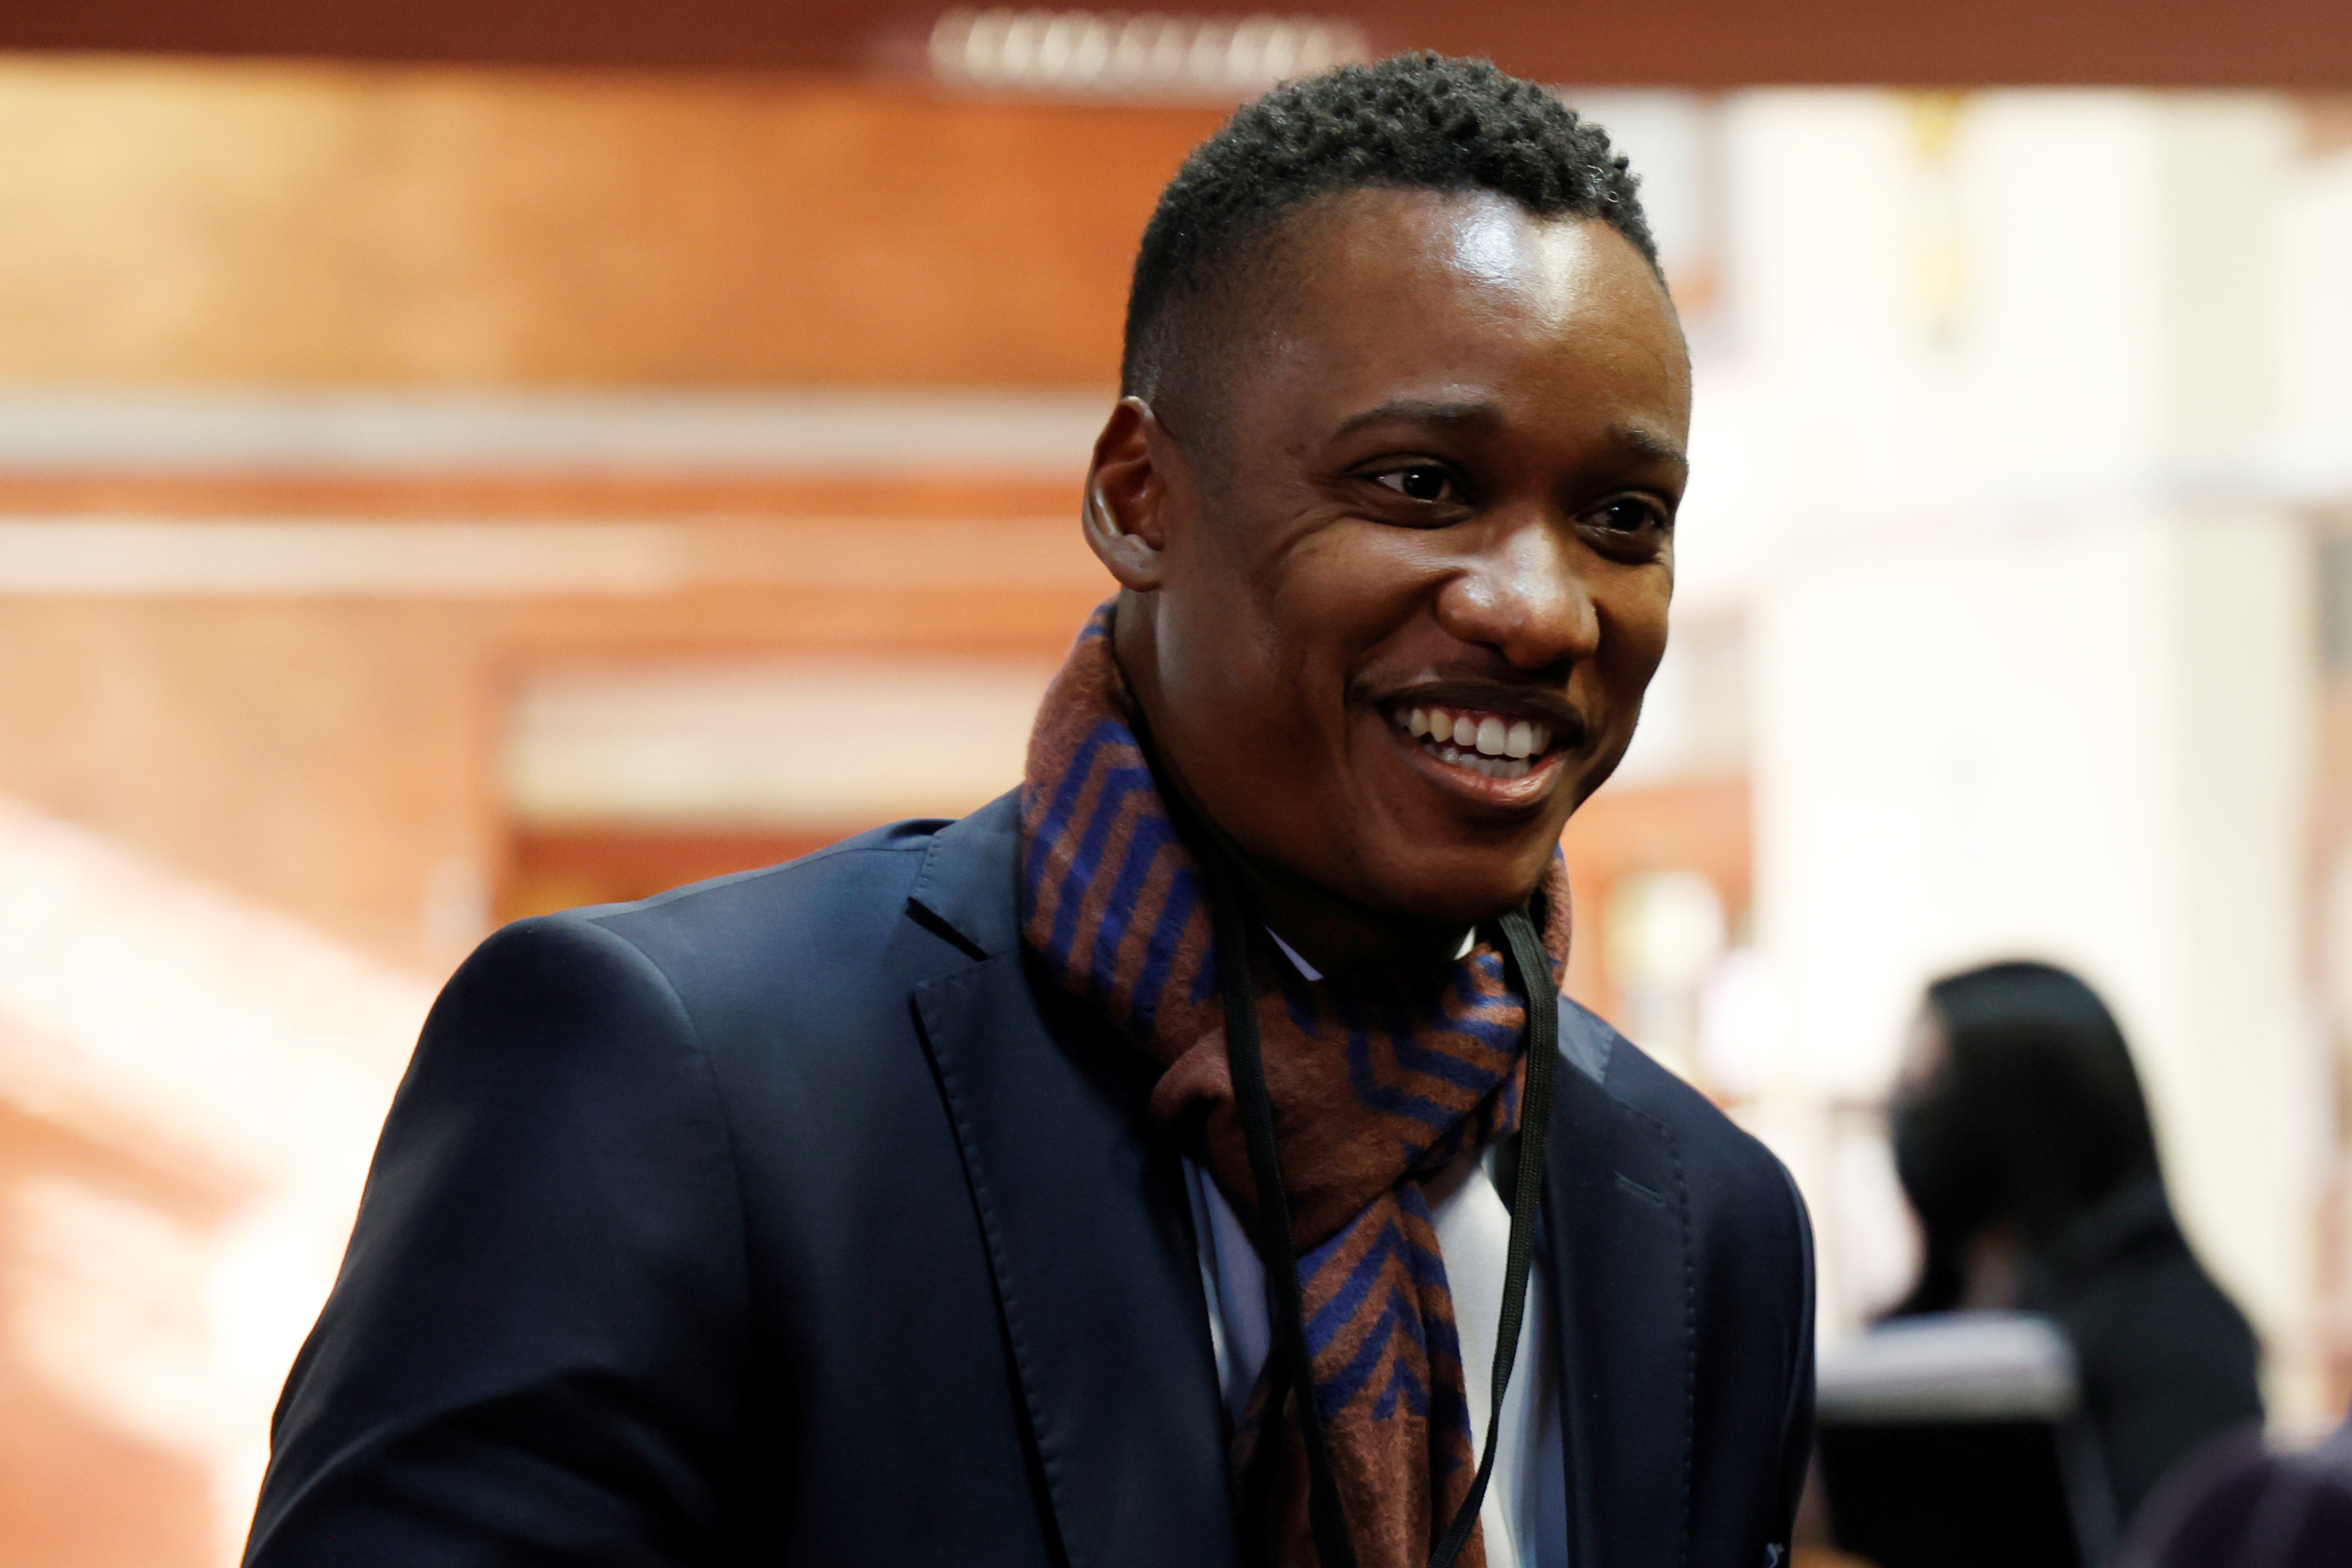 Duduzane Zuma, son of former South African President Jacob Zuma arrives at court at his father's corruption trial in Pietermaritzburg